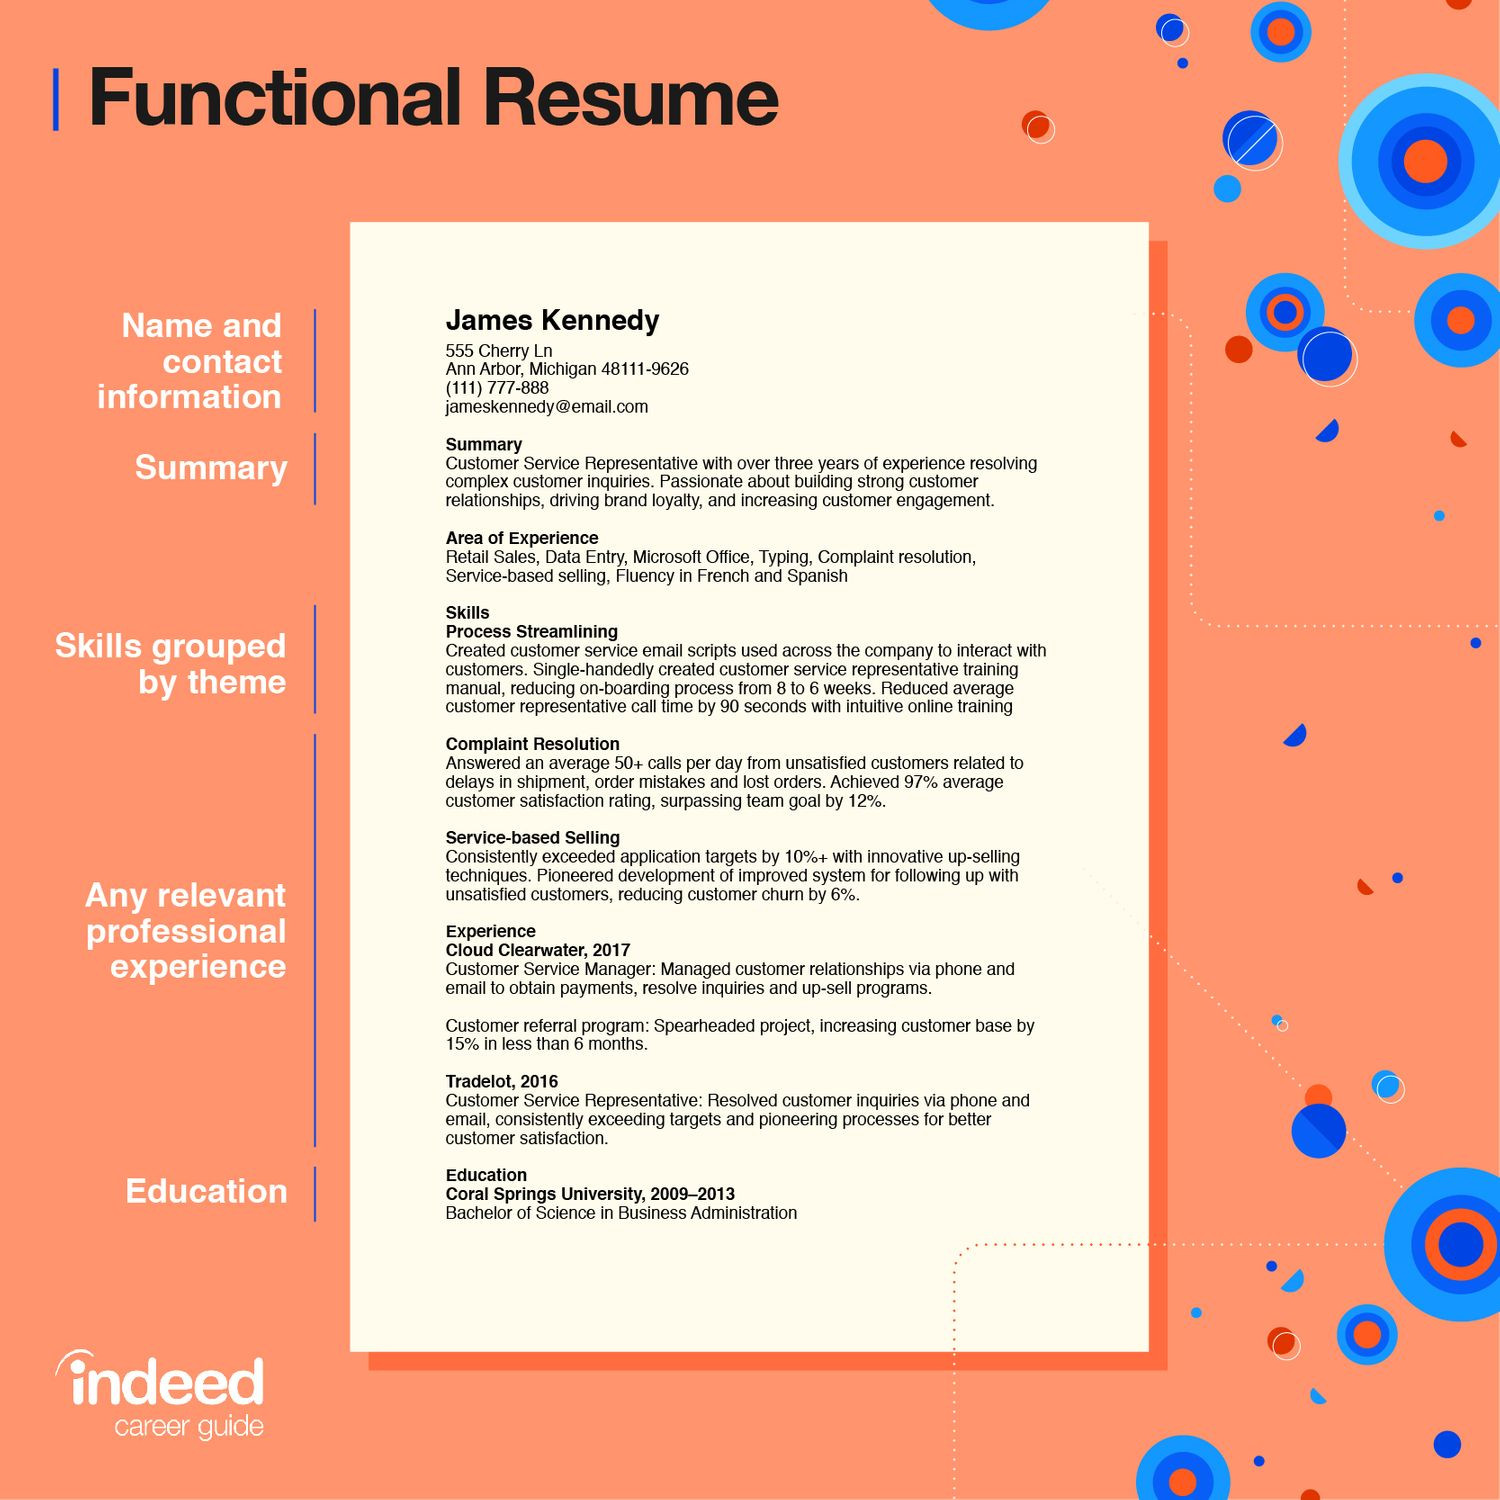 Sample Resume Relevant Skills and Experience 10 Best Skills to Include On A Resume (with Examples) Indeed.com